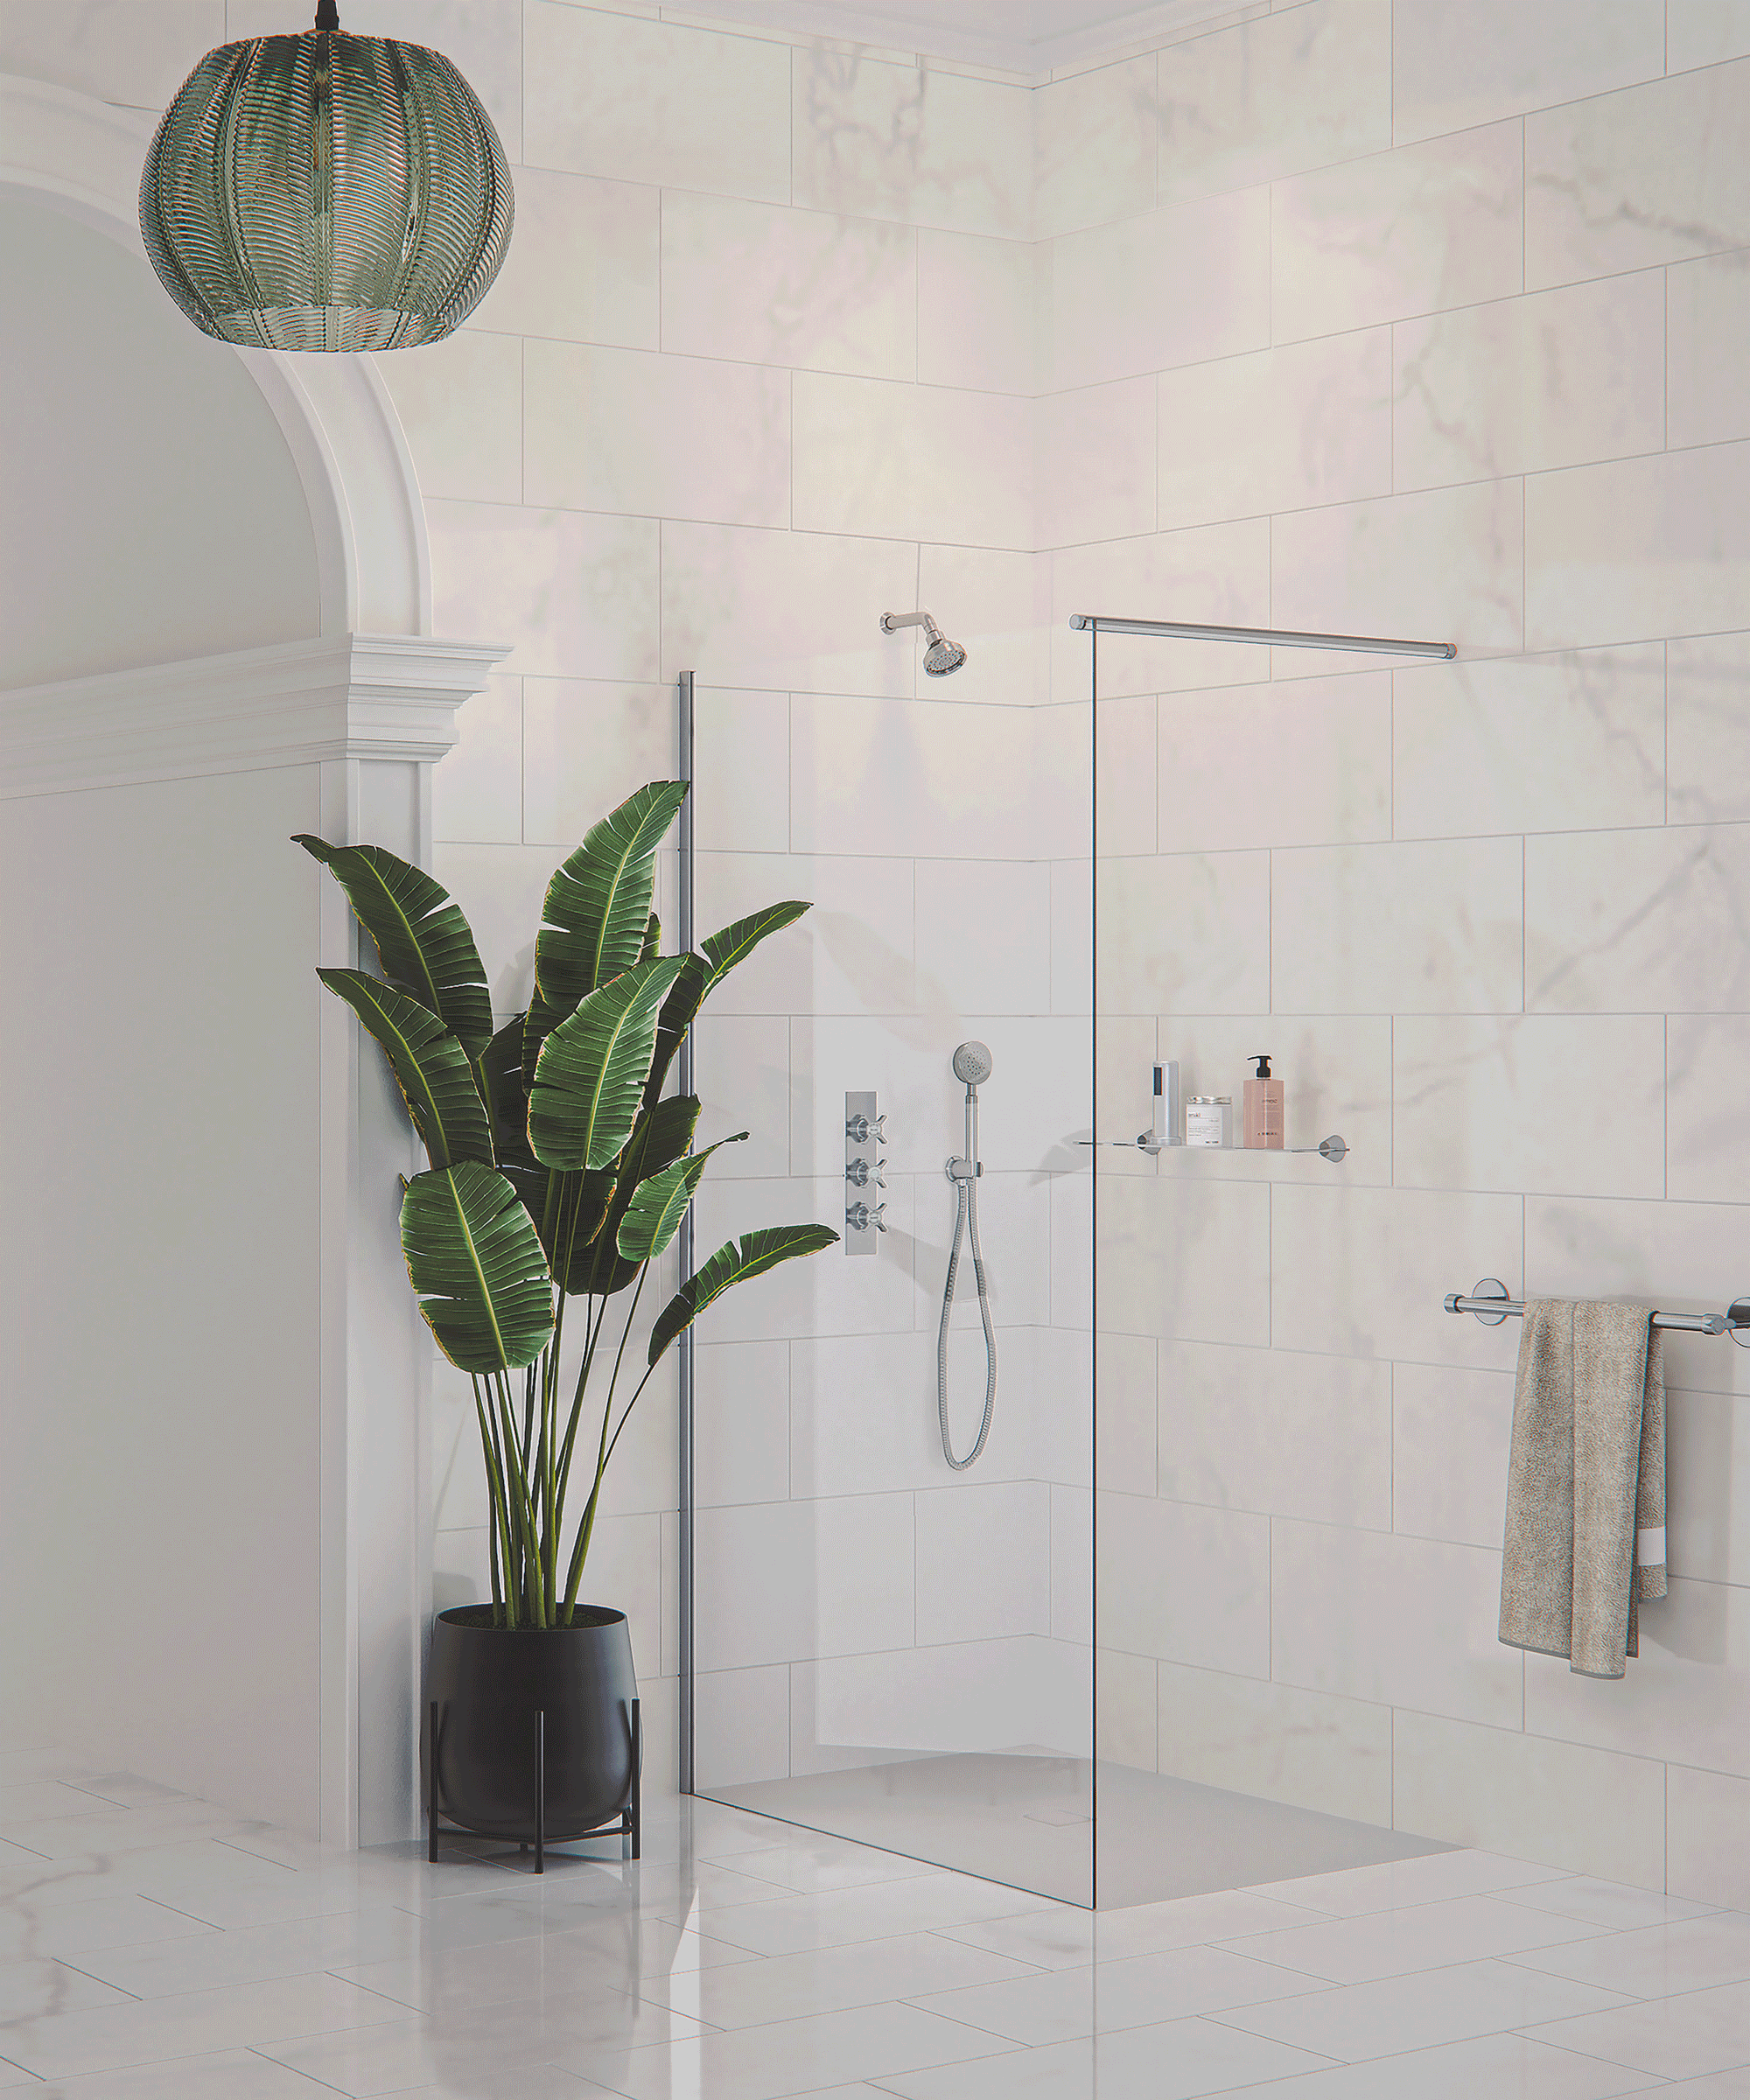 Wet room with plant and glass shower screen